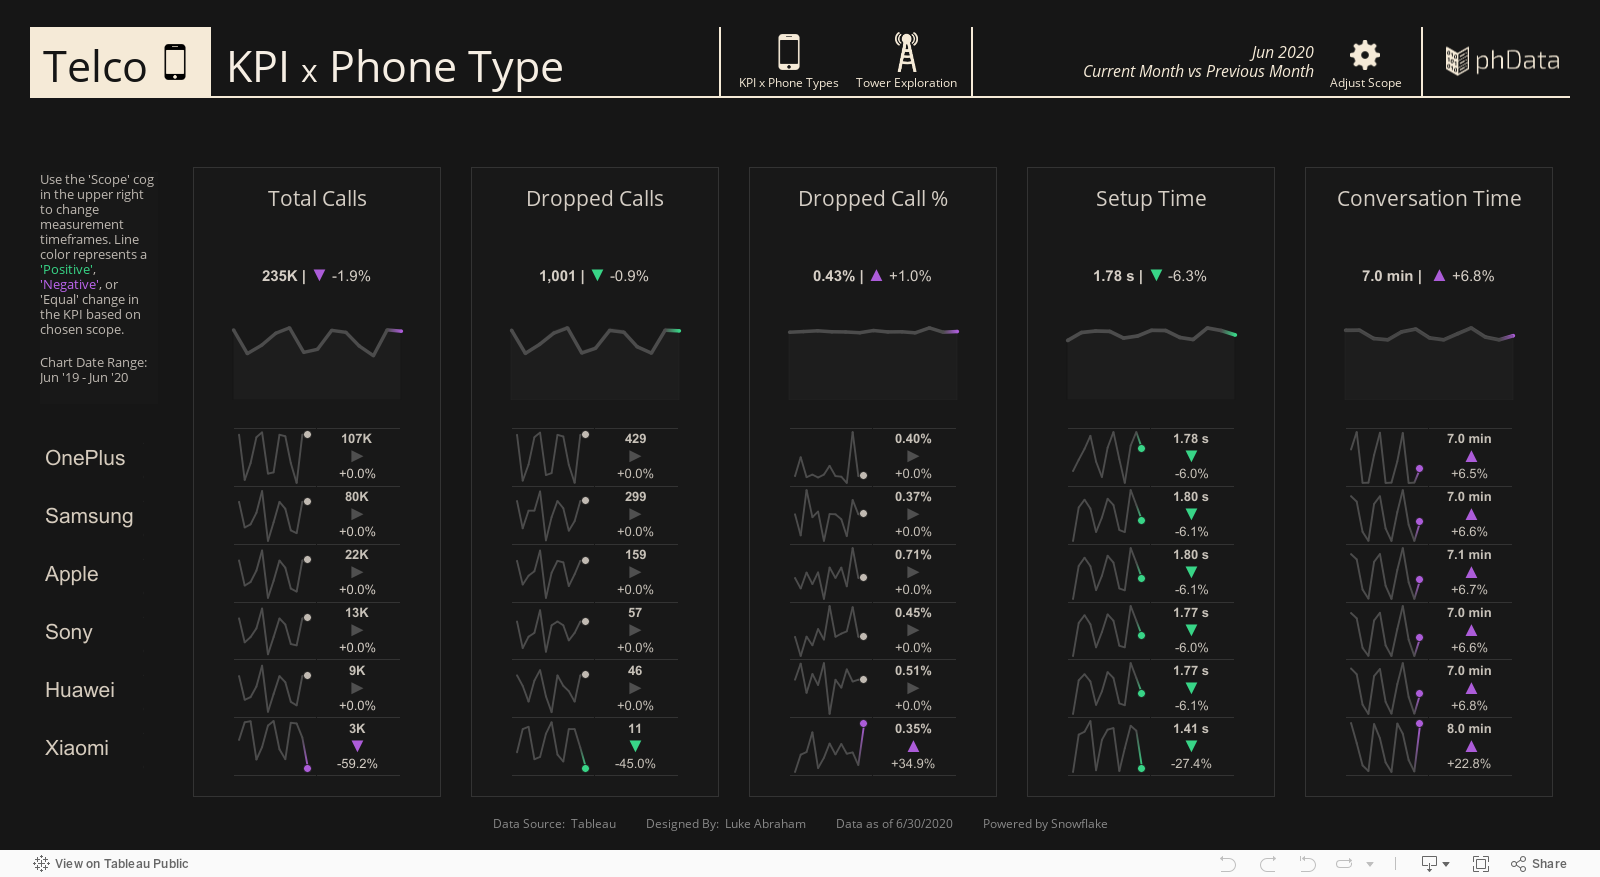 KPIs and Phone Types 